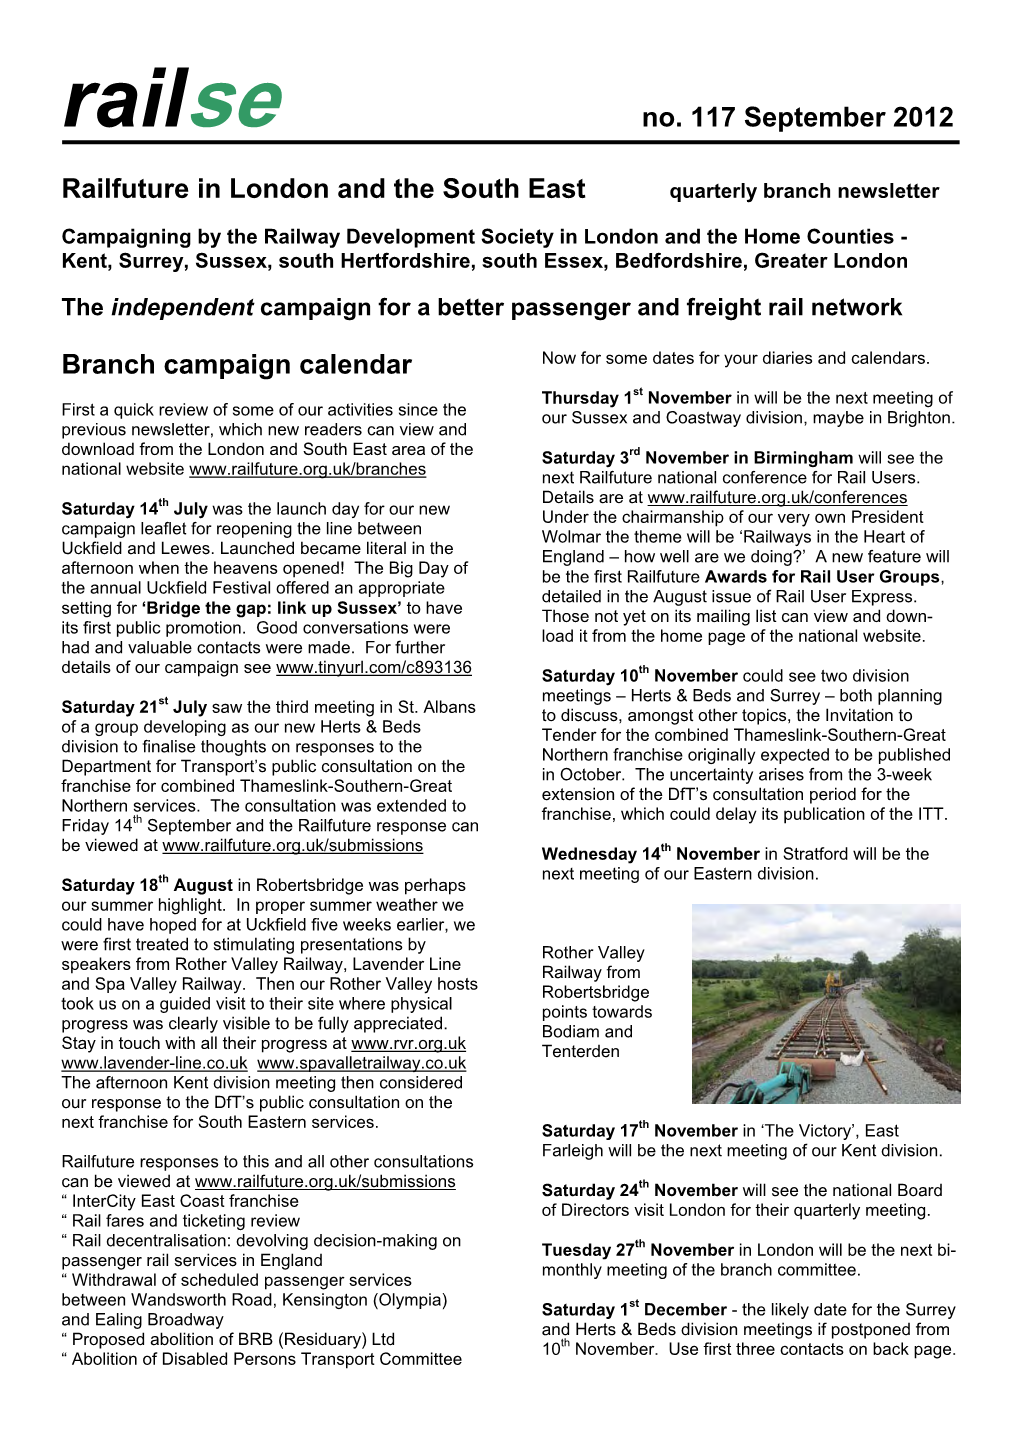 Railway Development Society in London and the Home Counties - Kent, Surrey, Sussex, South Hertfordshire, South Essex, Bedfordshire, Greater London